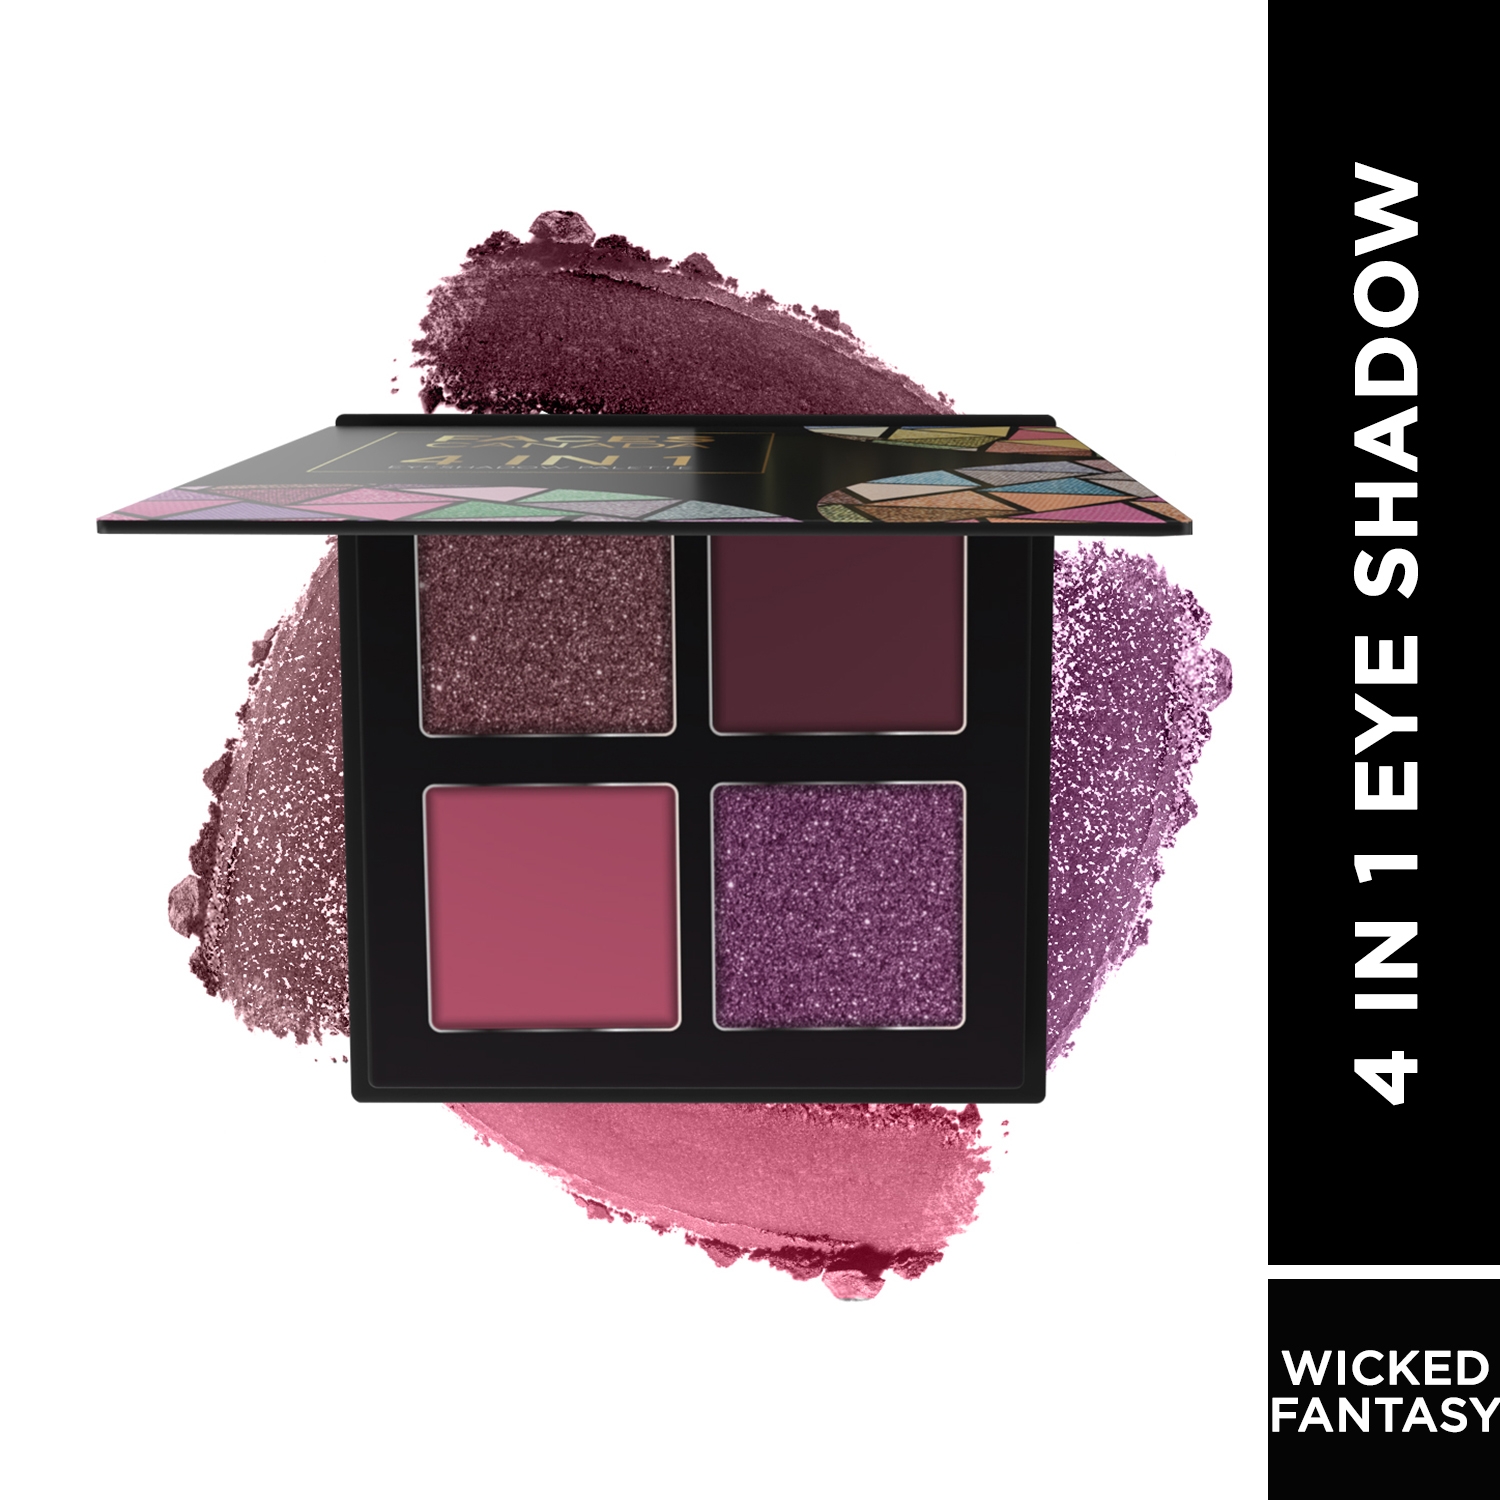 Faces Canada | Faces Canada 4 In 1 Quad Eyeshadow Palette - 03 Wicked Fantasy (5g)